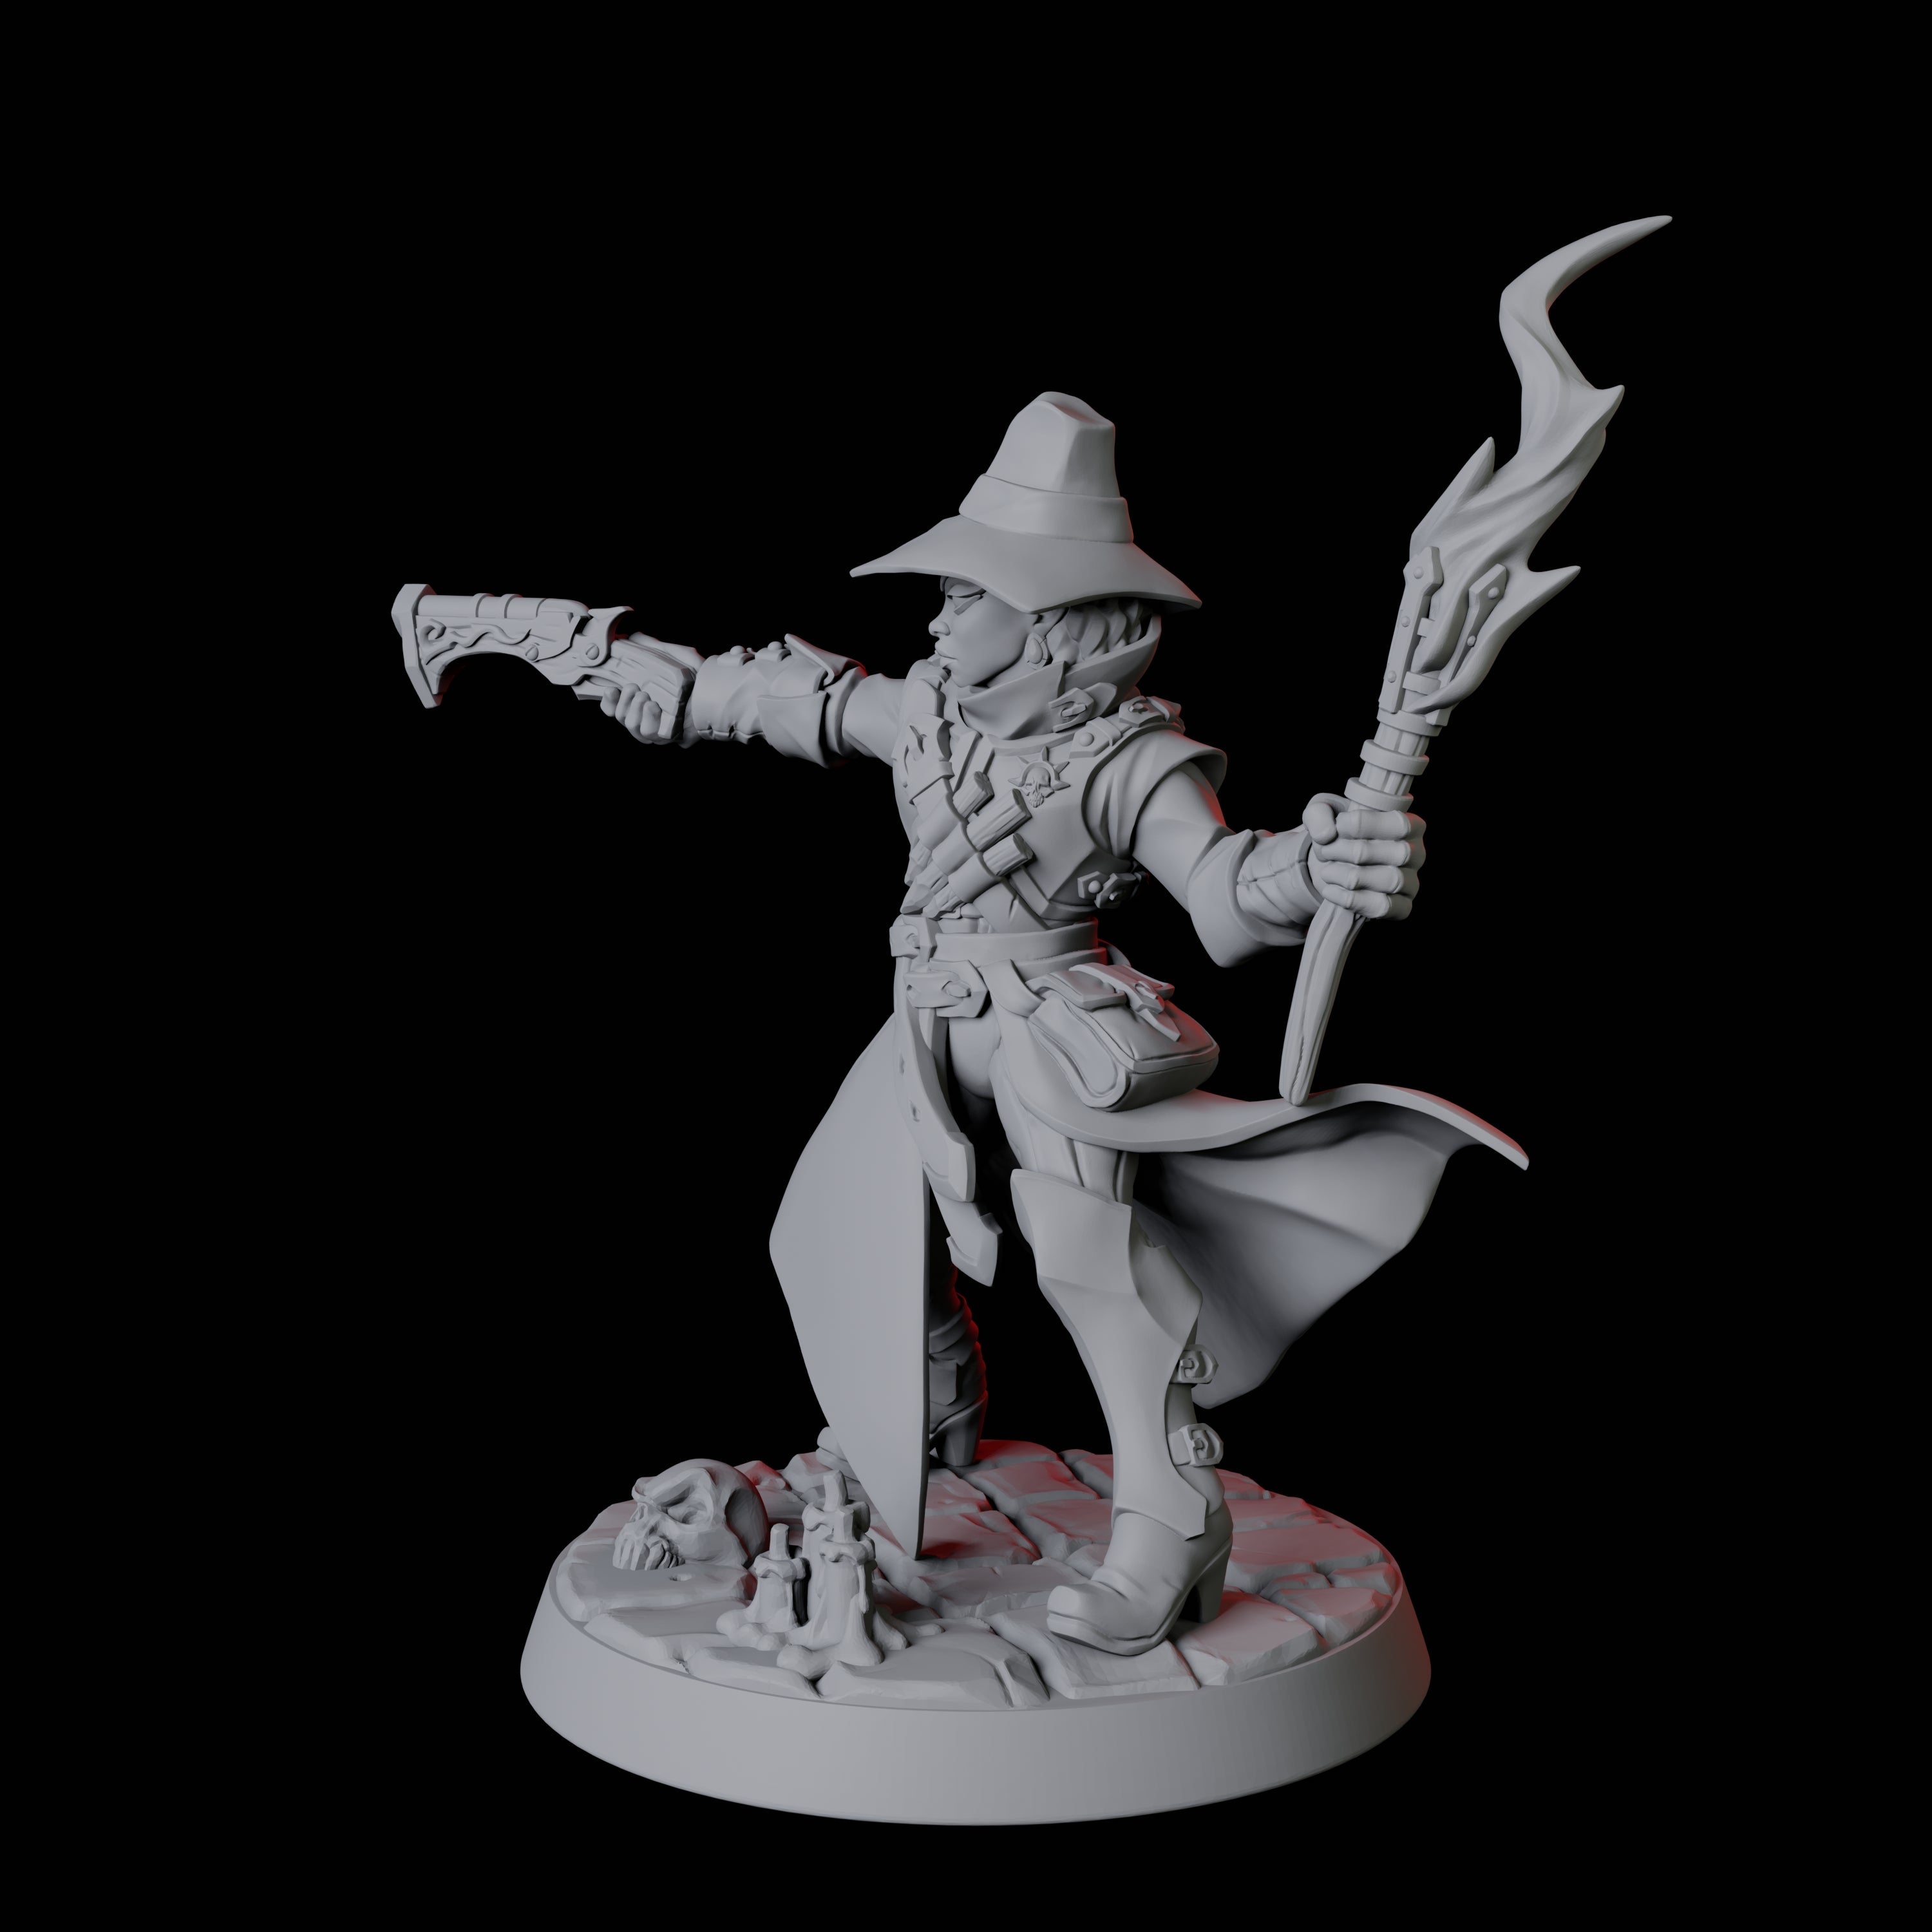 Vampire Hunter E Miniature for Dungeons and Dragons, Pathfinder or other TTRPGs